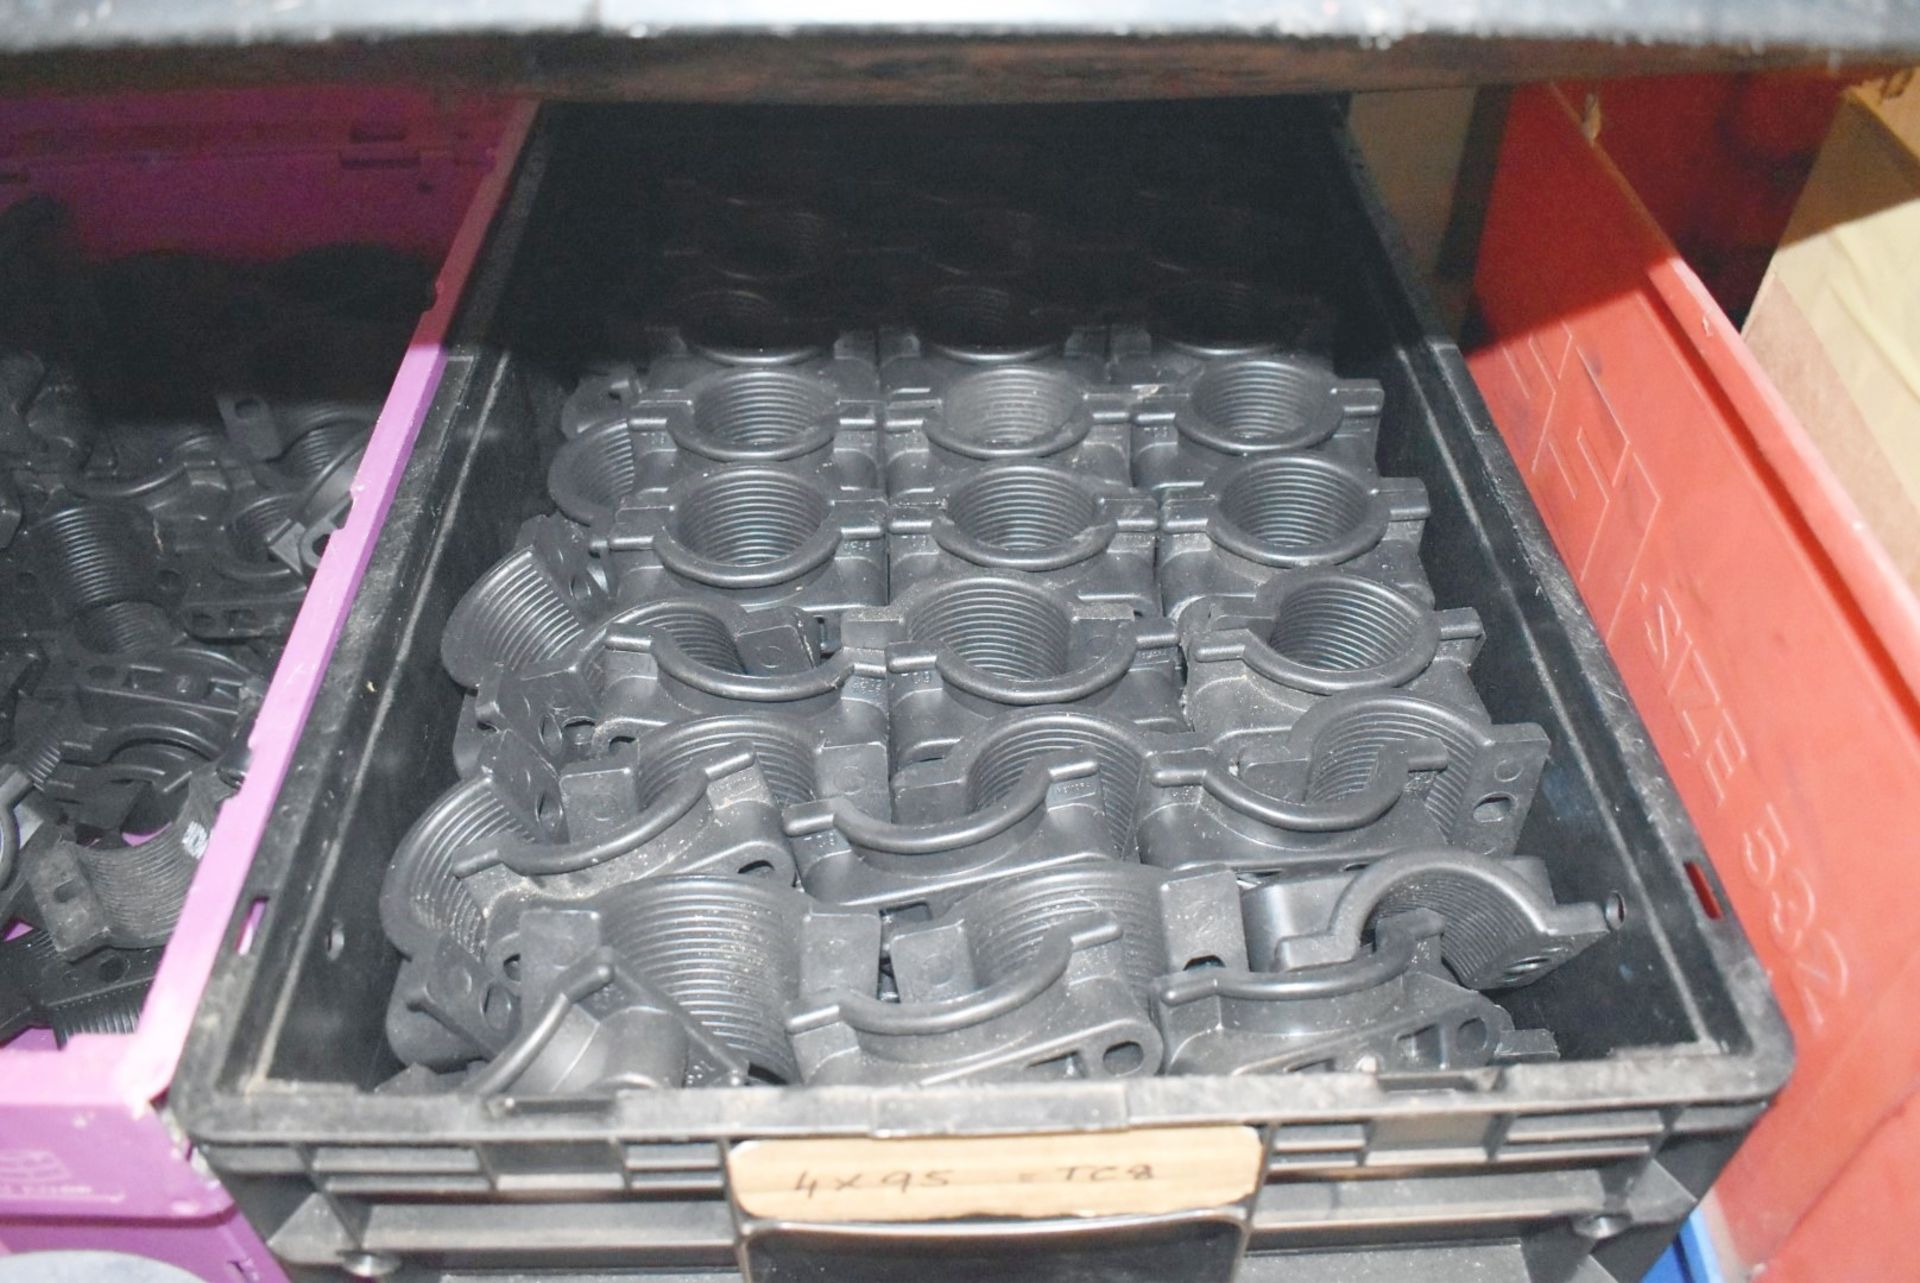 9 x Storage Containers Containing a Variety of Cable and Pipe Cleats - Unused Stock! - Image 7 of 11